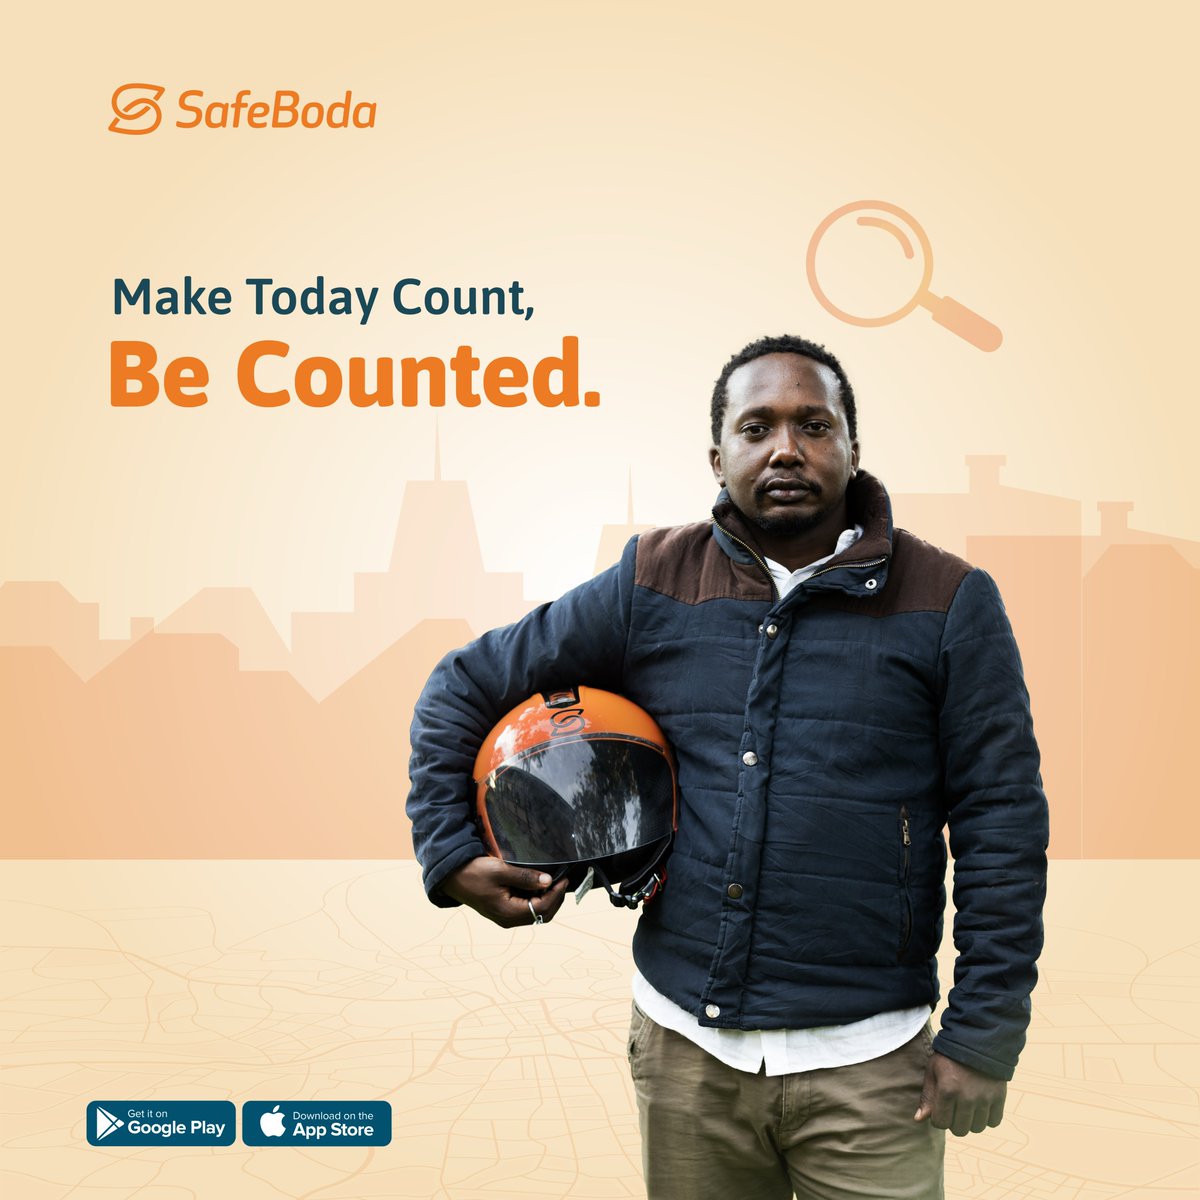 Another holiday for you; Make it count! As we count our customers at #SafeBoda, you are our number ONE user and we are ready to serve you today.